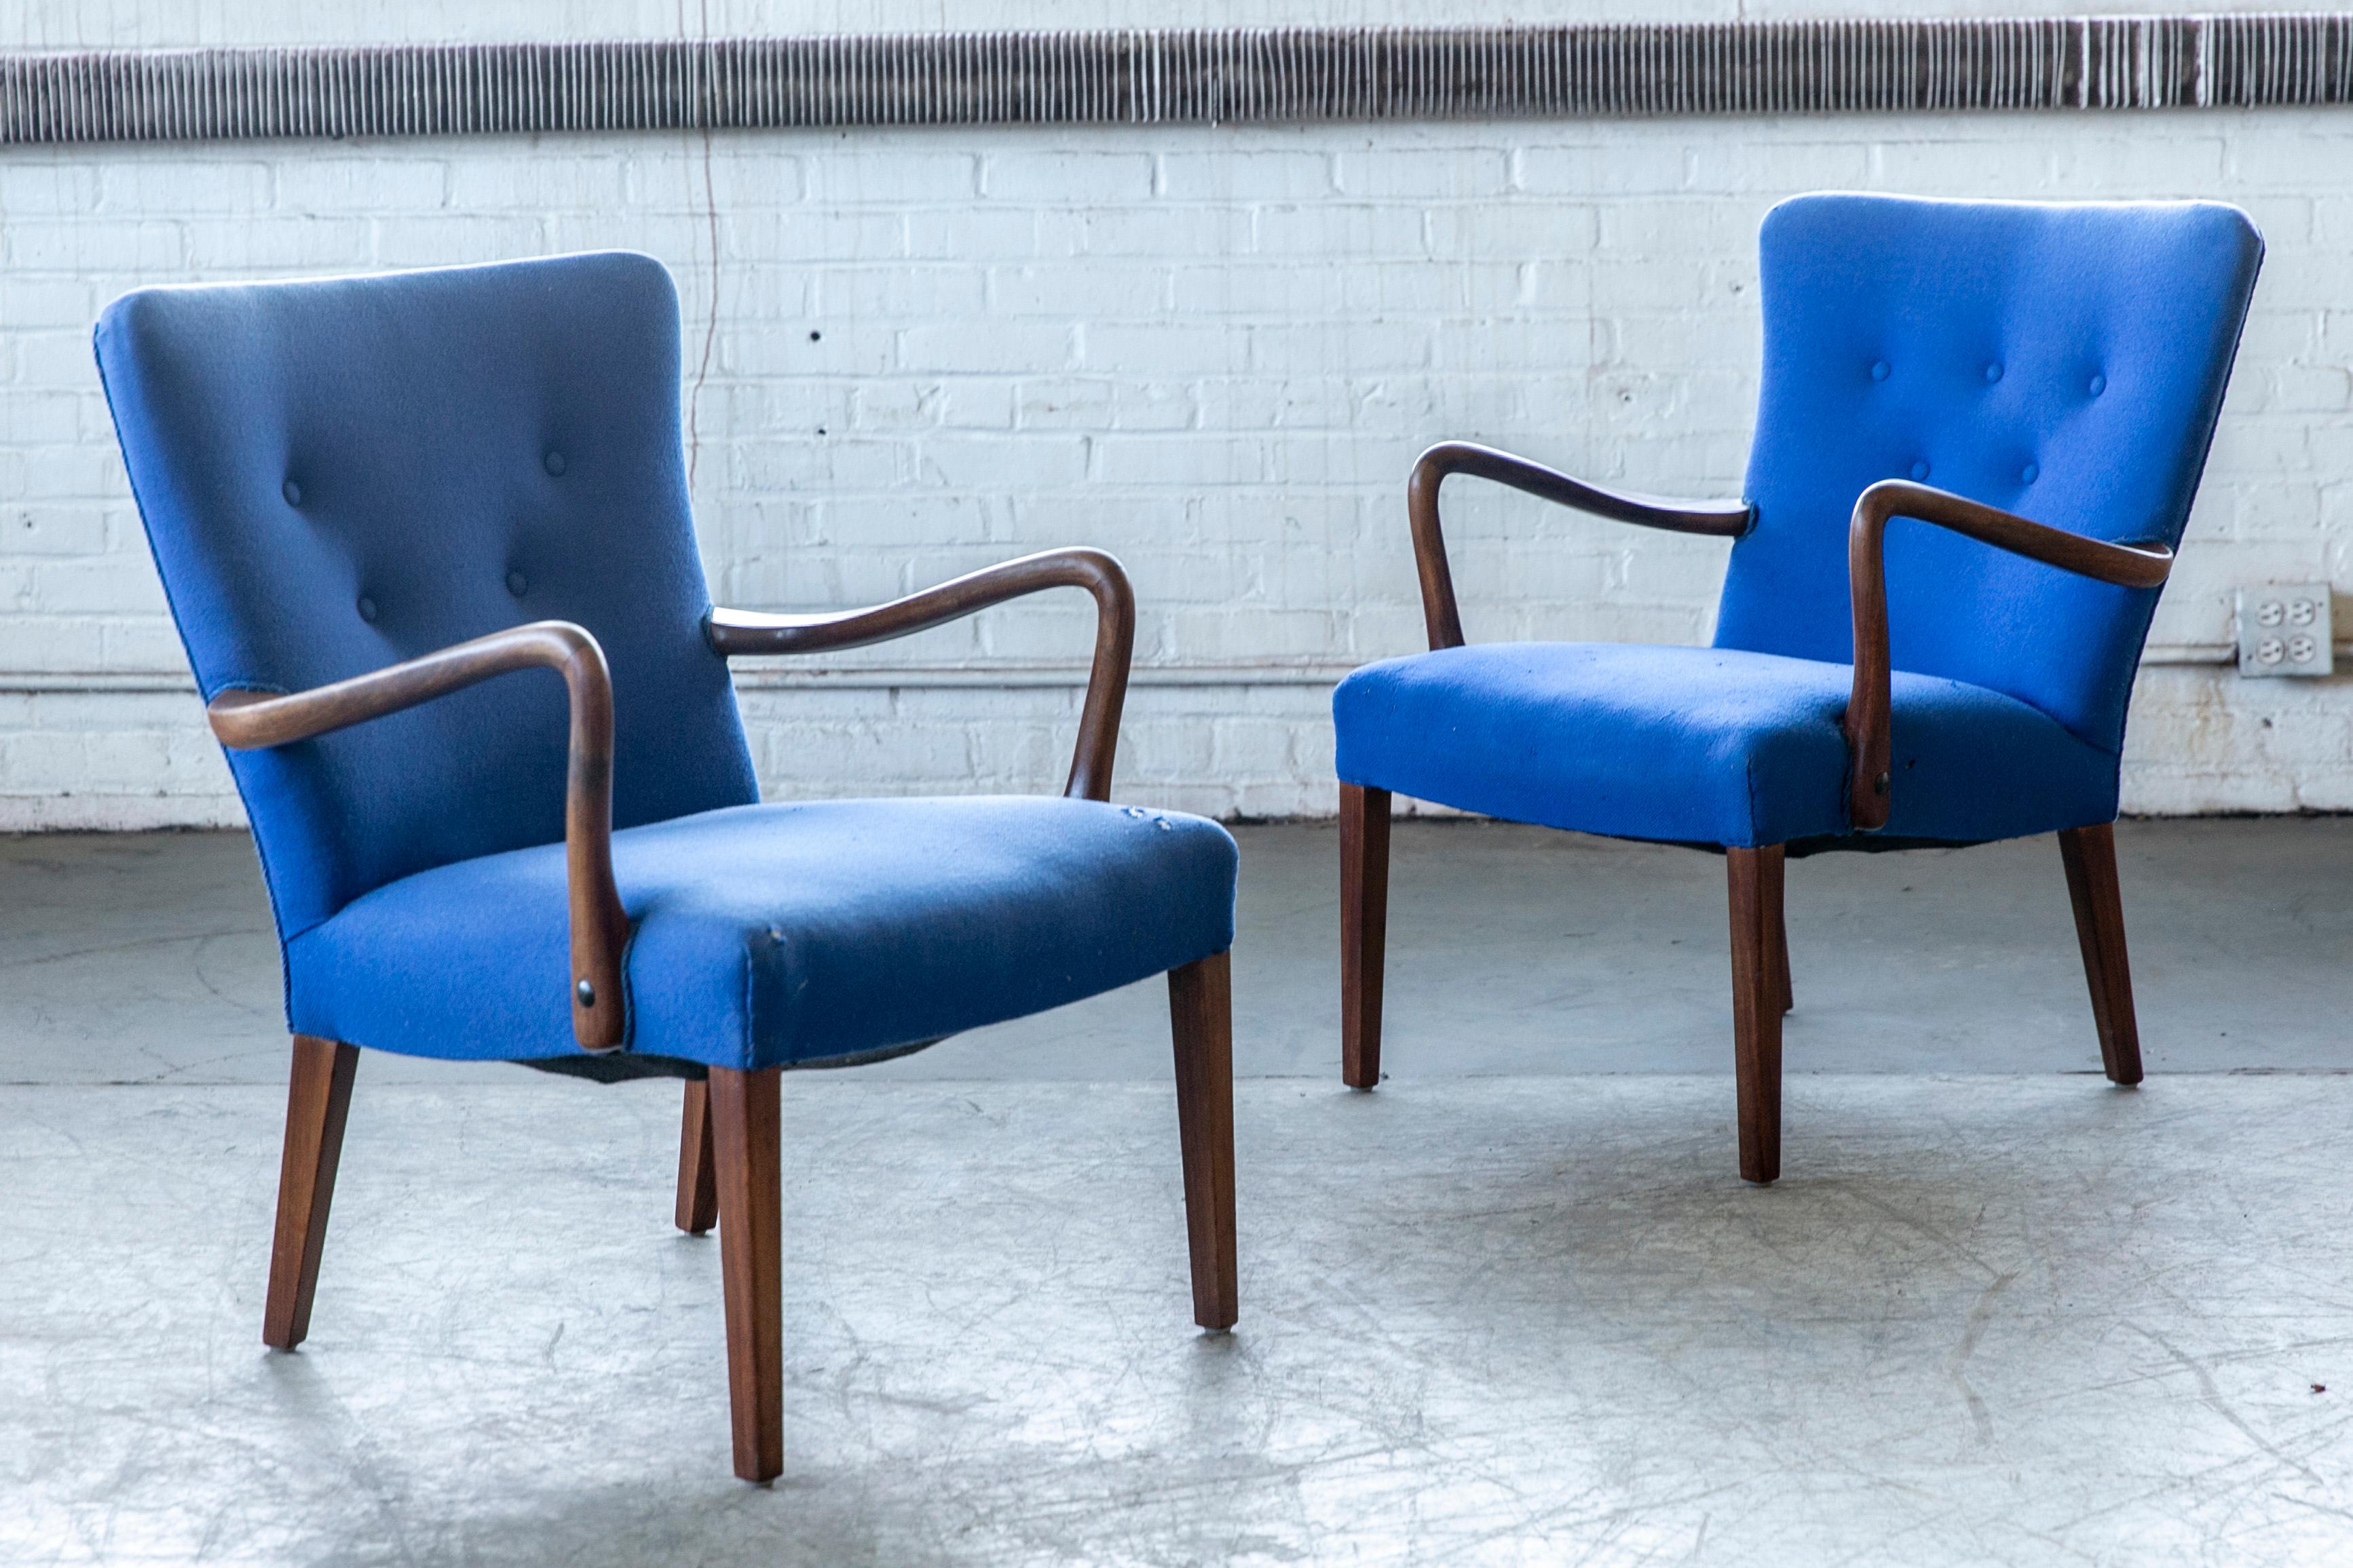 Classic elegant Danish high back armchair from the 1940s. We cannot be entirely sure but the chairs appears to be by Alfred Christensen for Slagelse Mobelvaerk. The chairs are made with open armrests in beautifully curved mahogany. Nice slim elegant